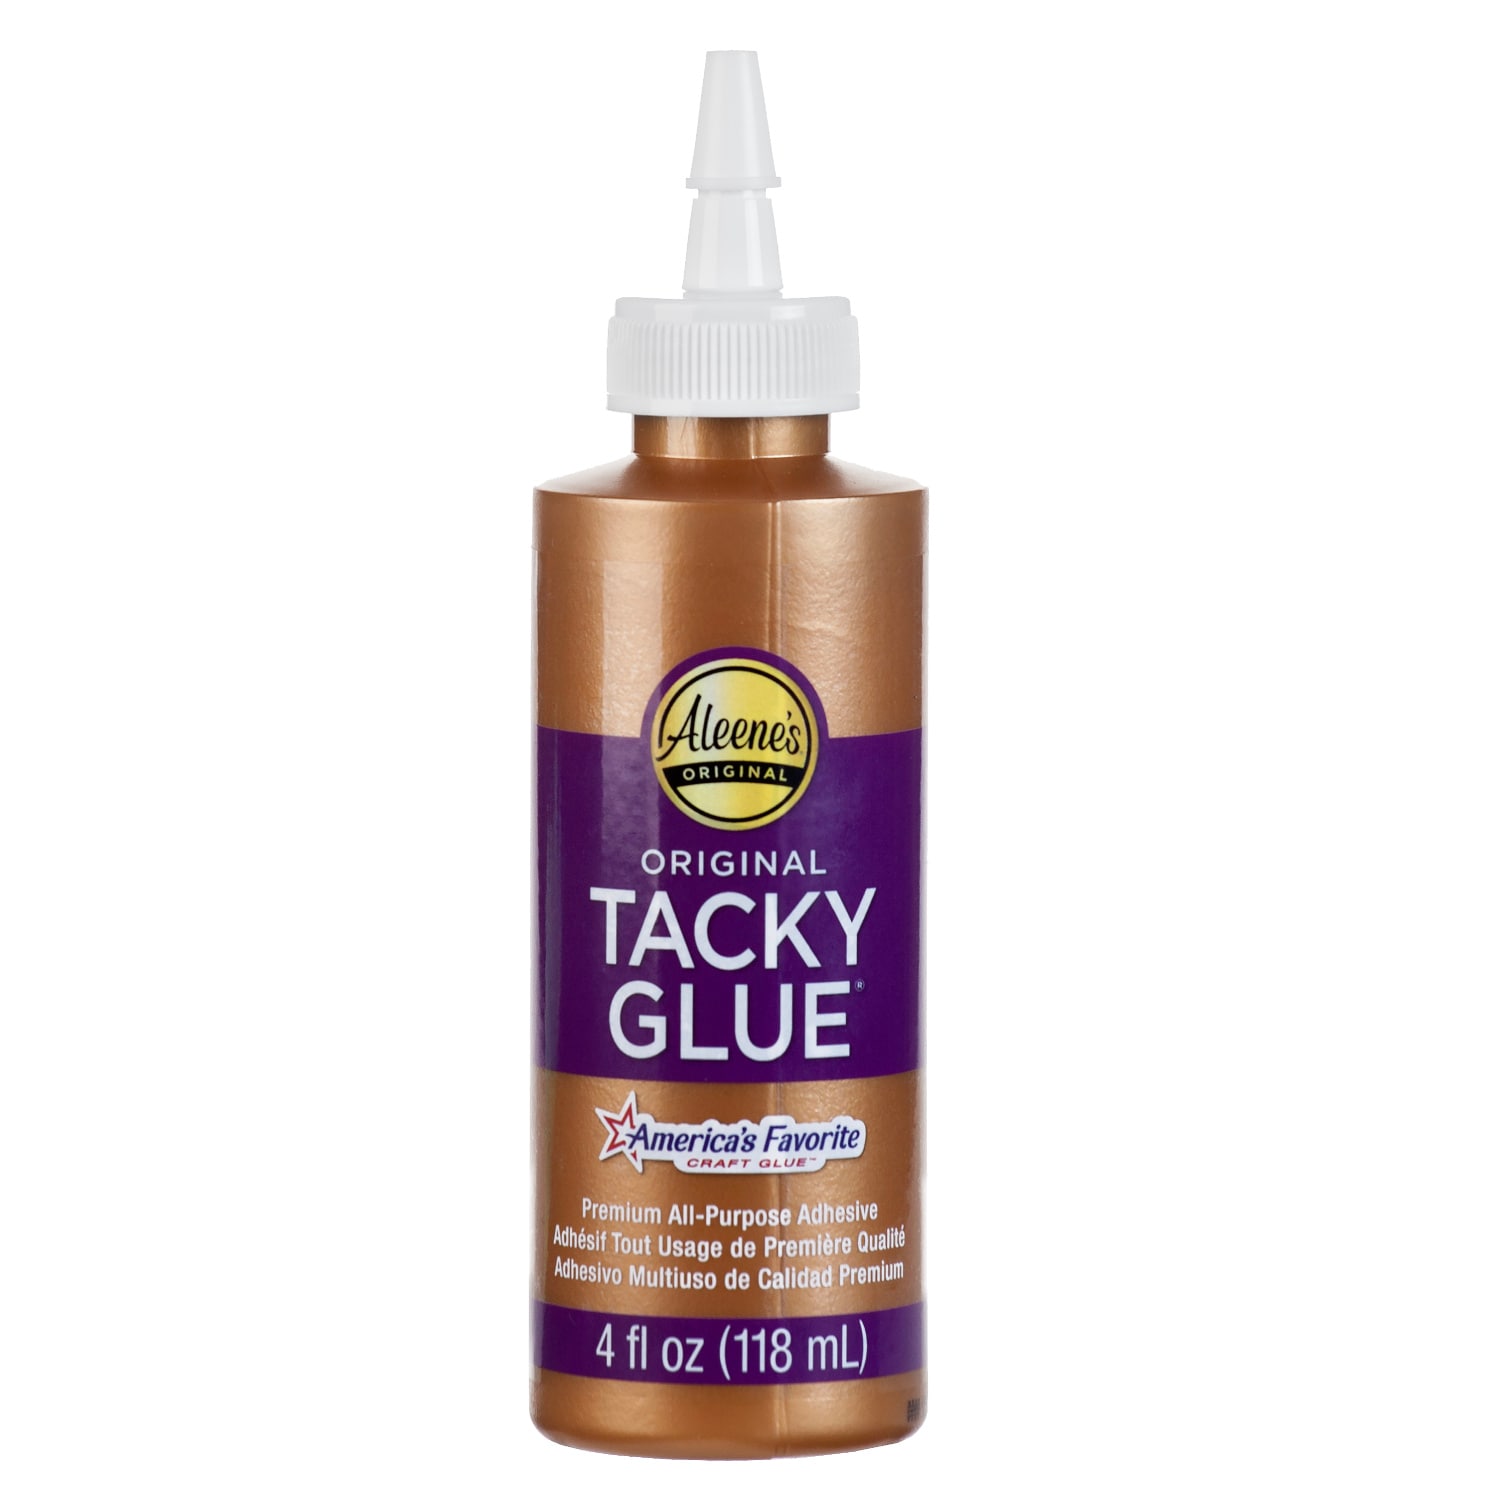 Elmer's Sticky Out Adhesive Remover, 4.5 oz. 